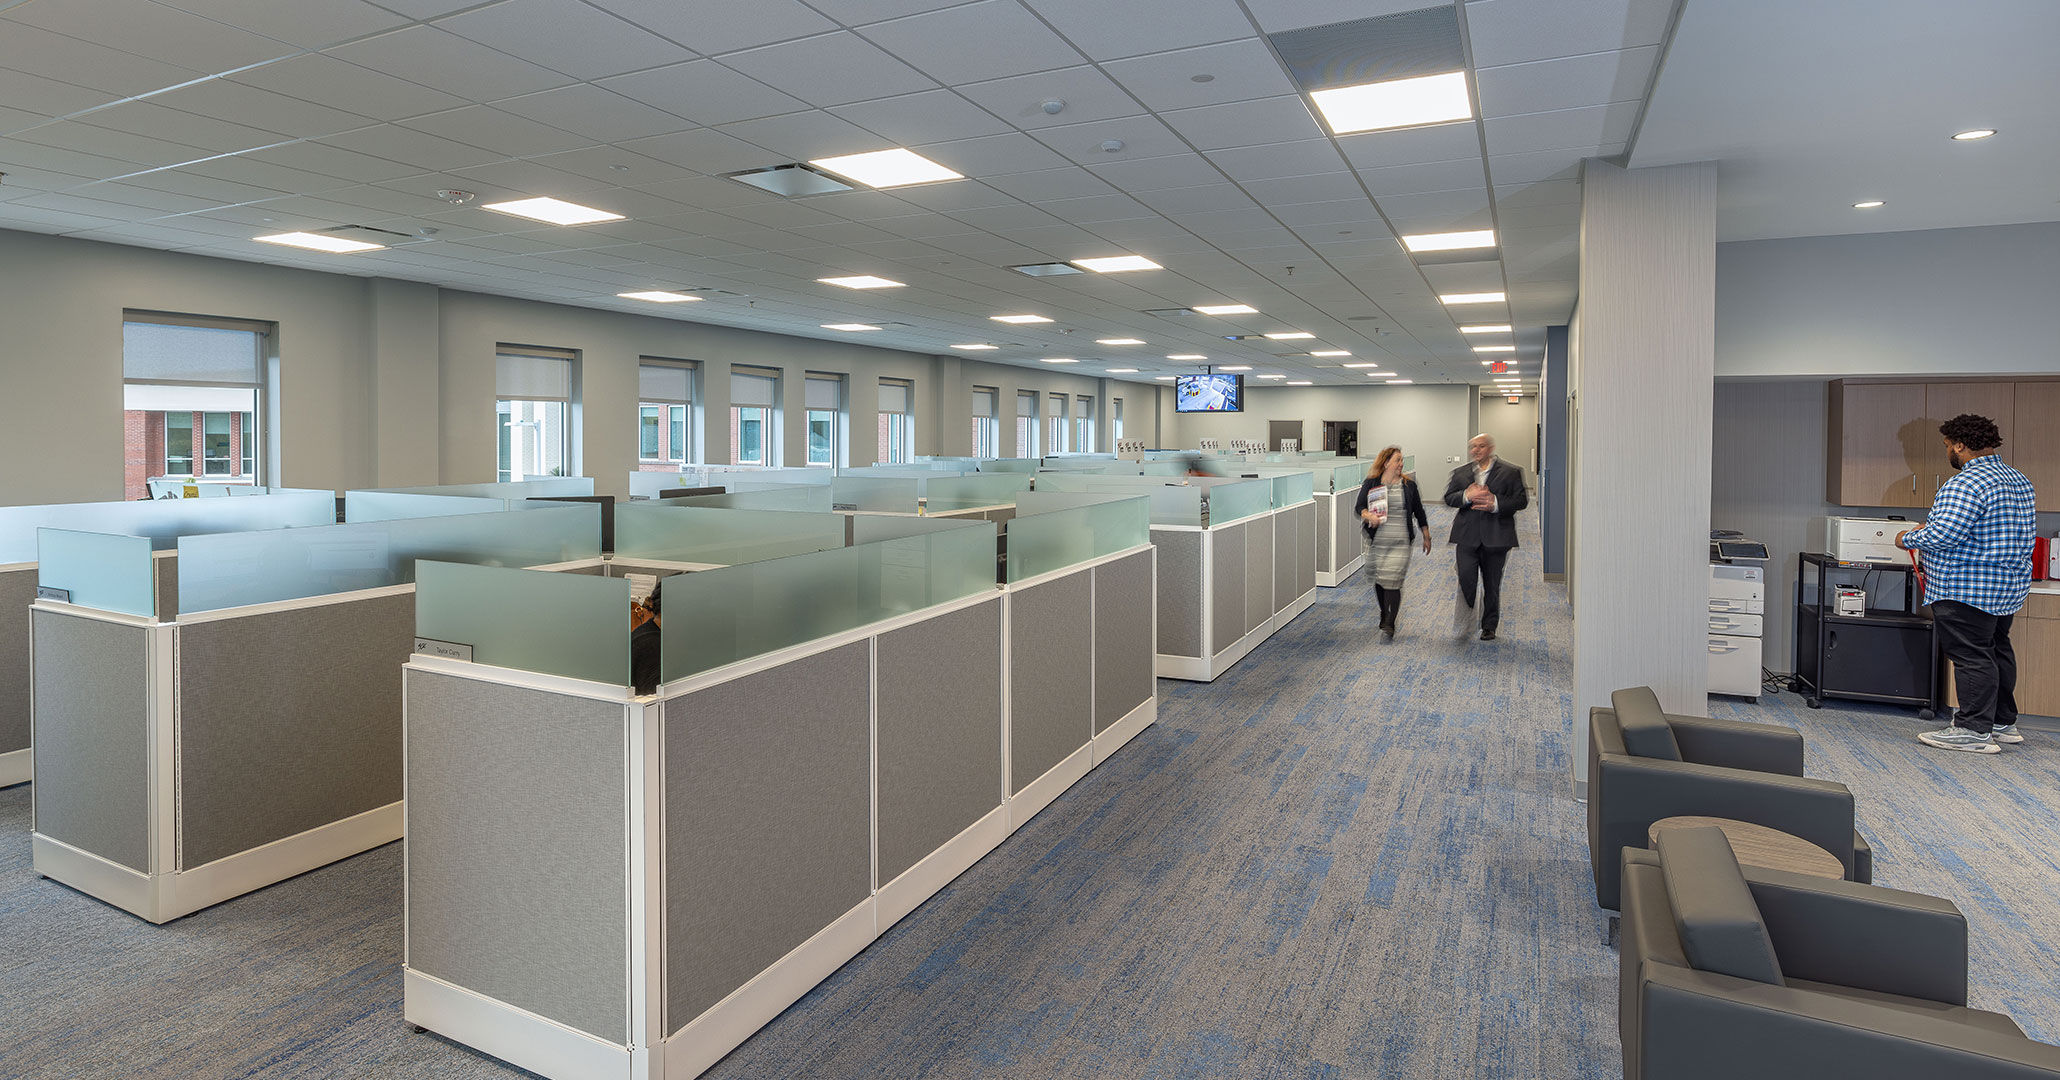 The newly constructed SCU Headquarters is approximately 74,000 square feet of office space.